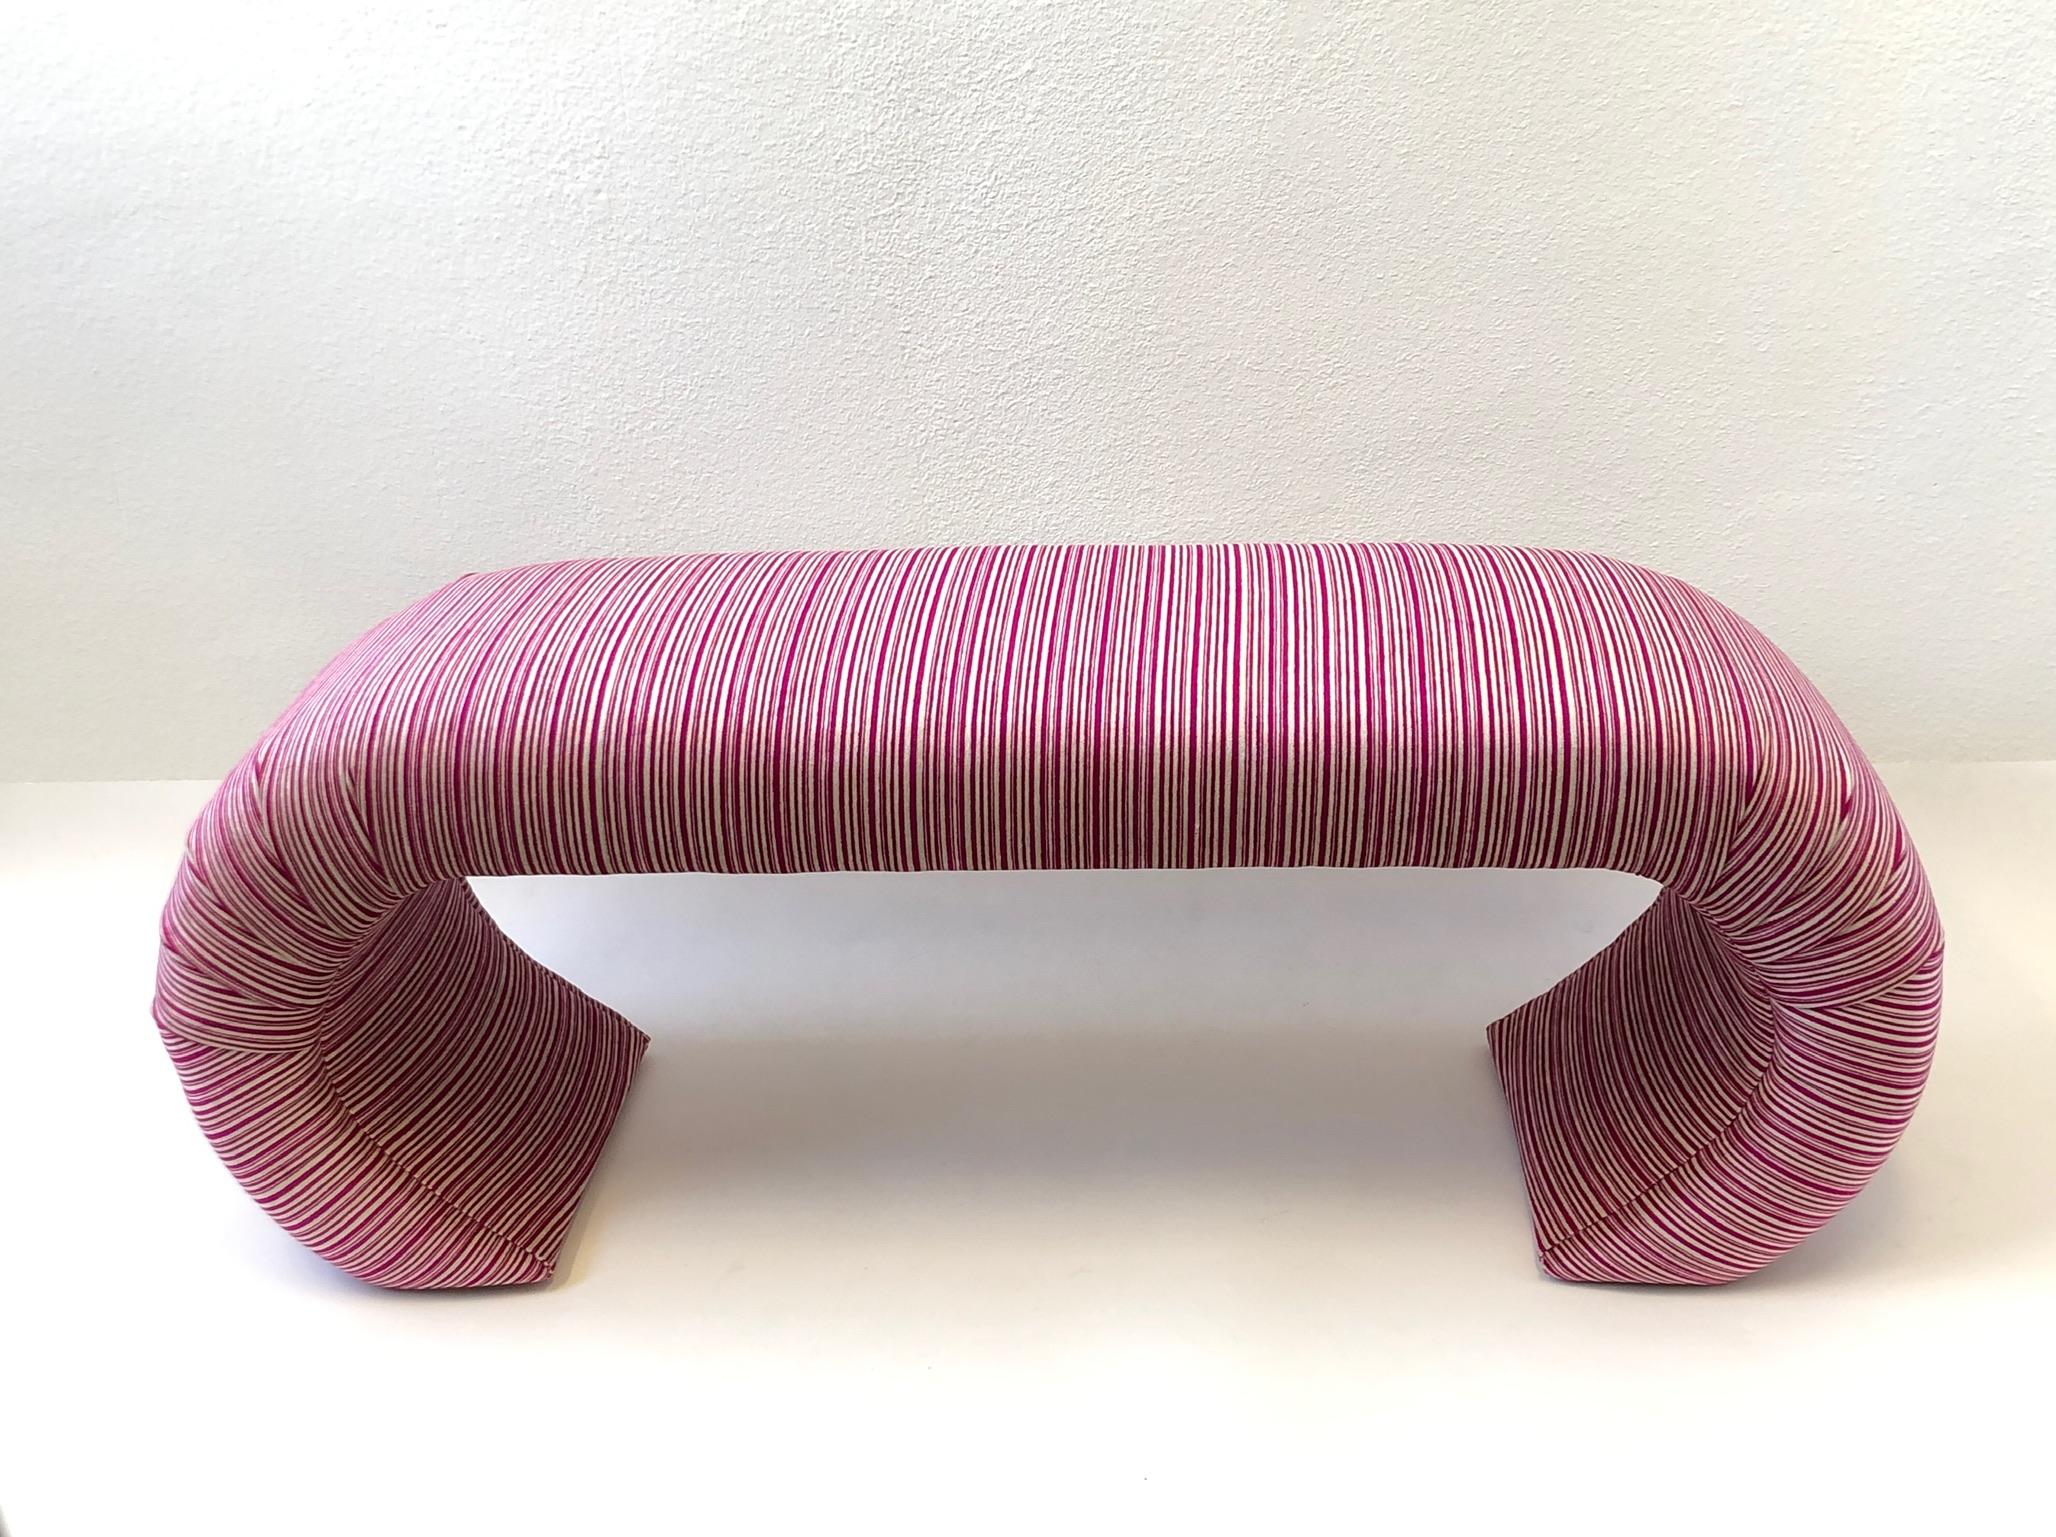 Late 20th Century Striped Waterfall Bench by Steve Chase